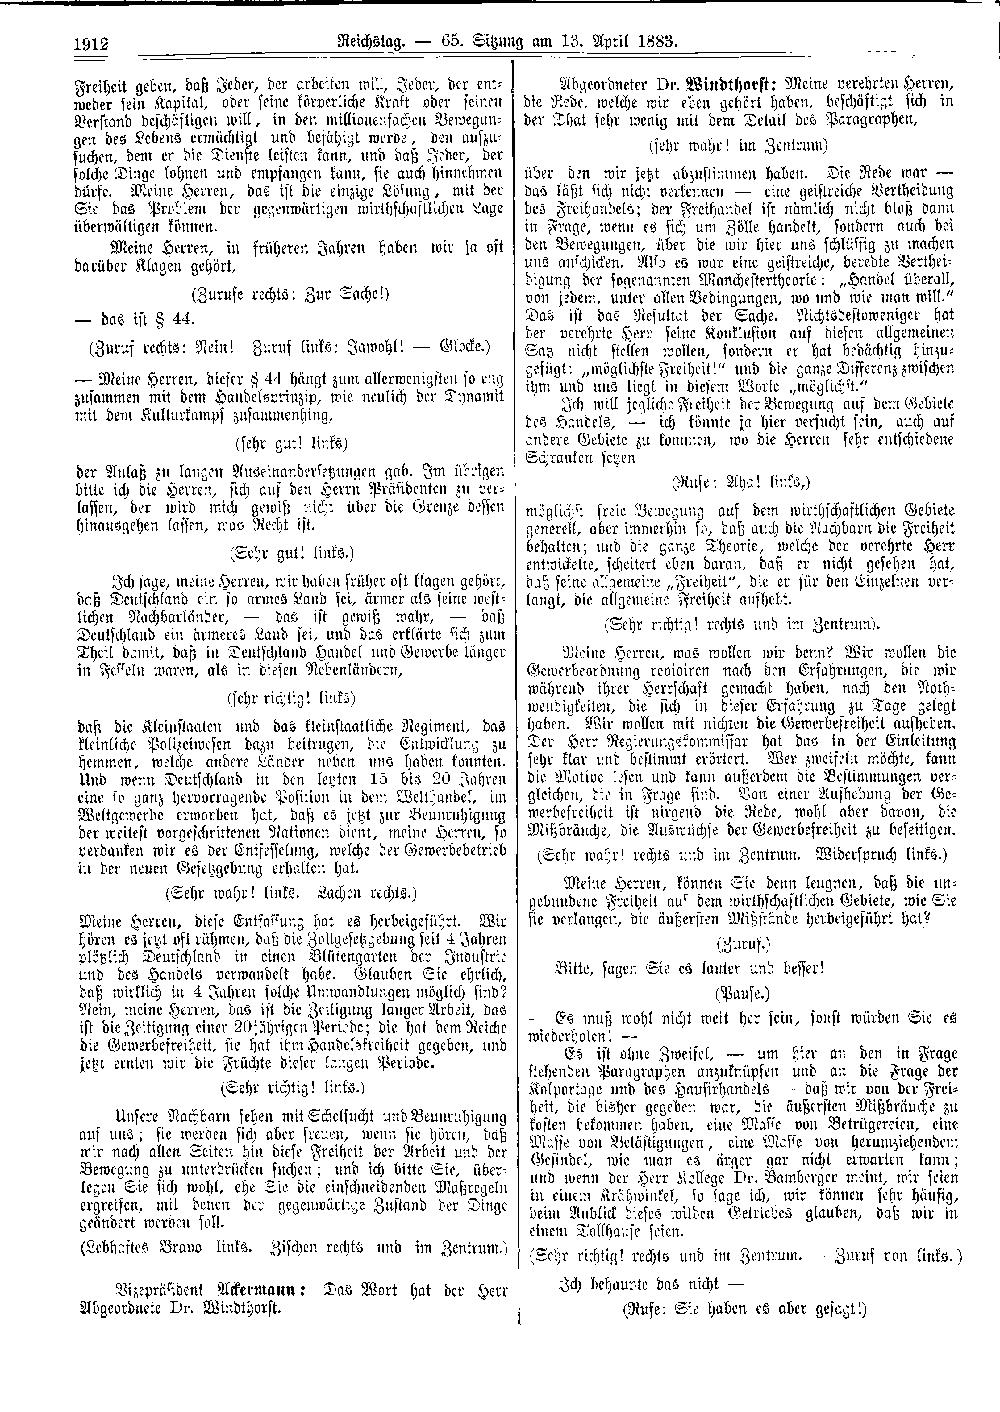 Scan of page 1912